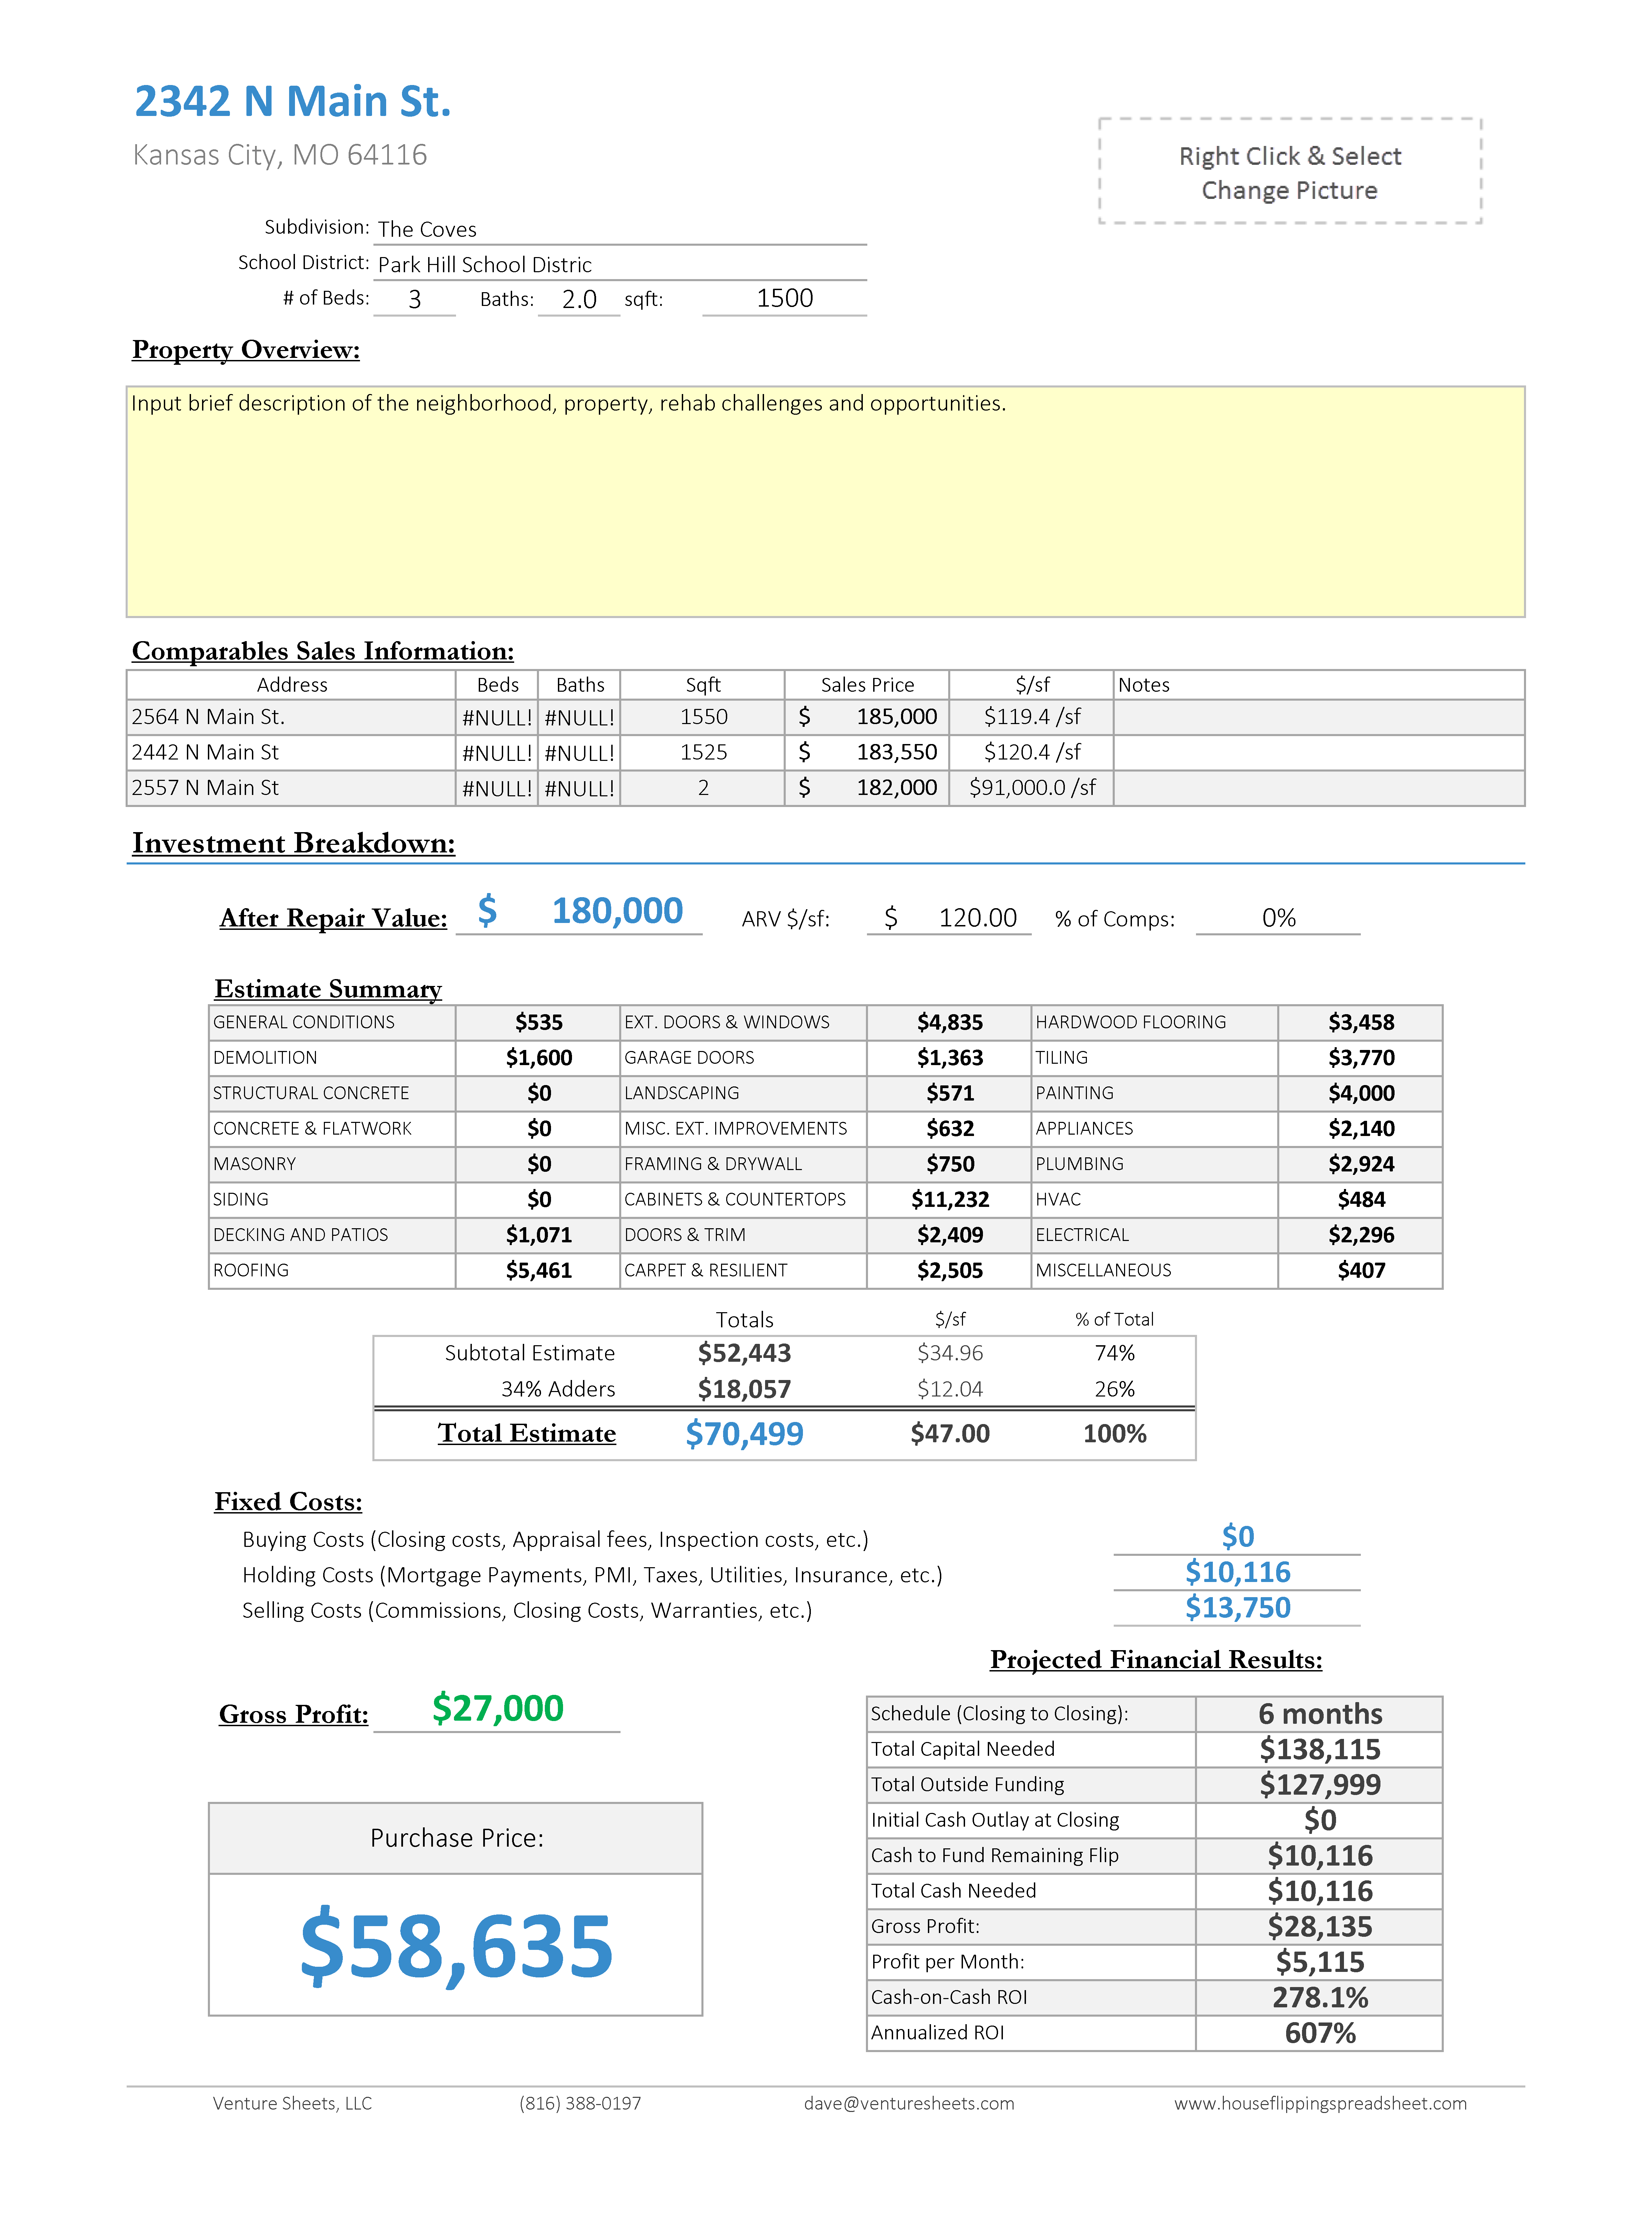 Deal Analyzer Spreadsheet Download With Regard To House Flipping Spreadsheet  Rehabbing And House Flipping